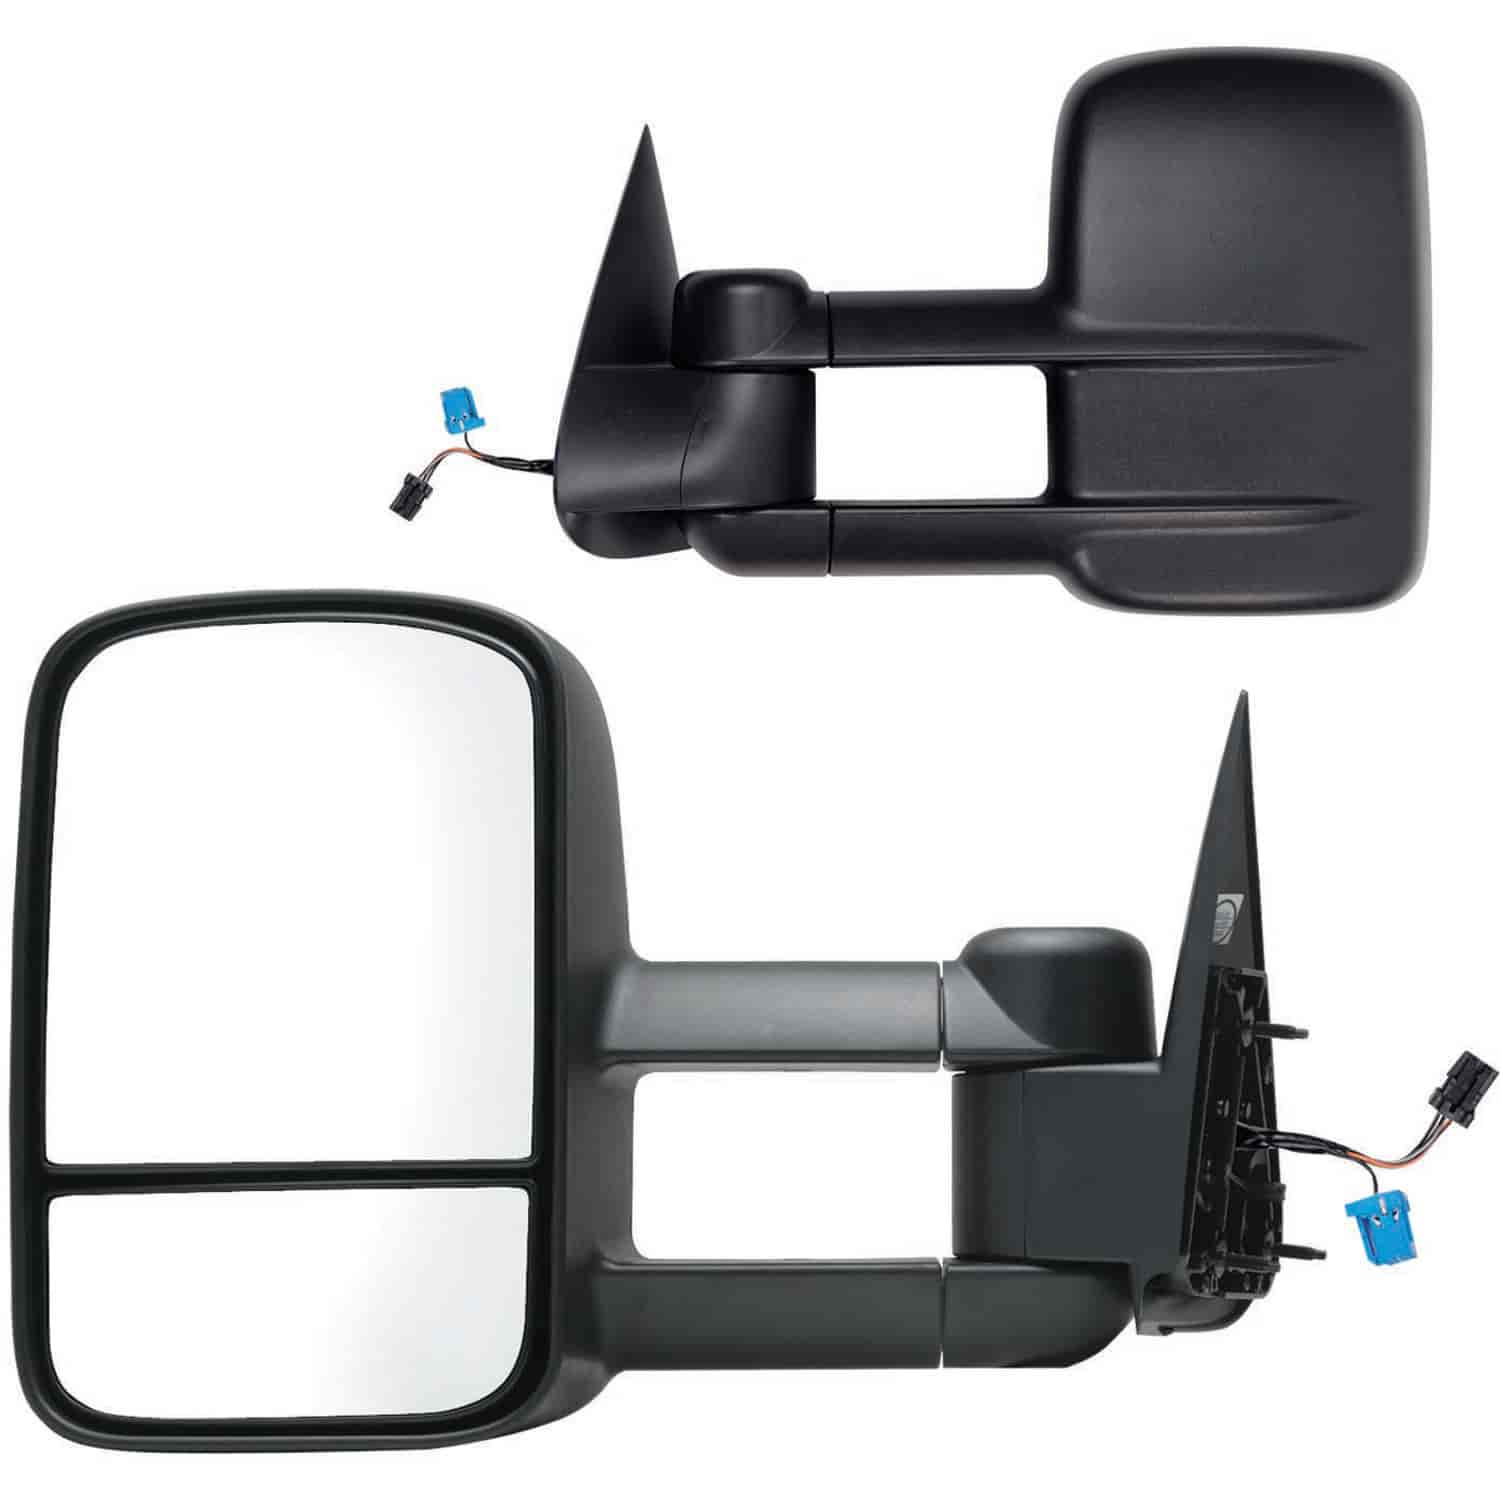 OEM Style Replacement mirror for 03-06 Silverado/ Sierra/